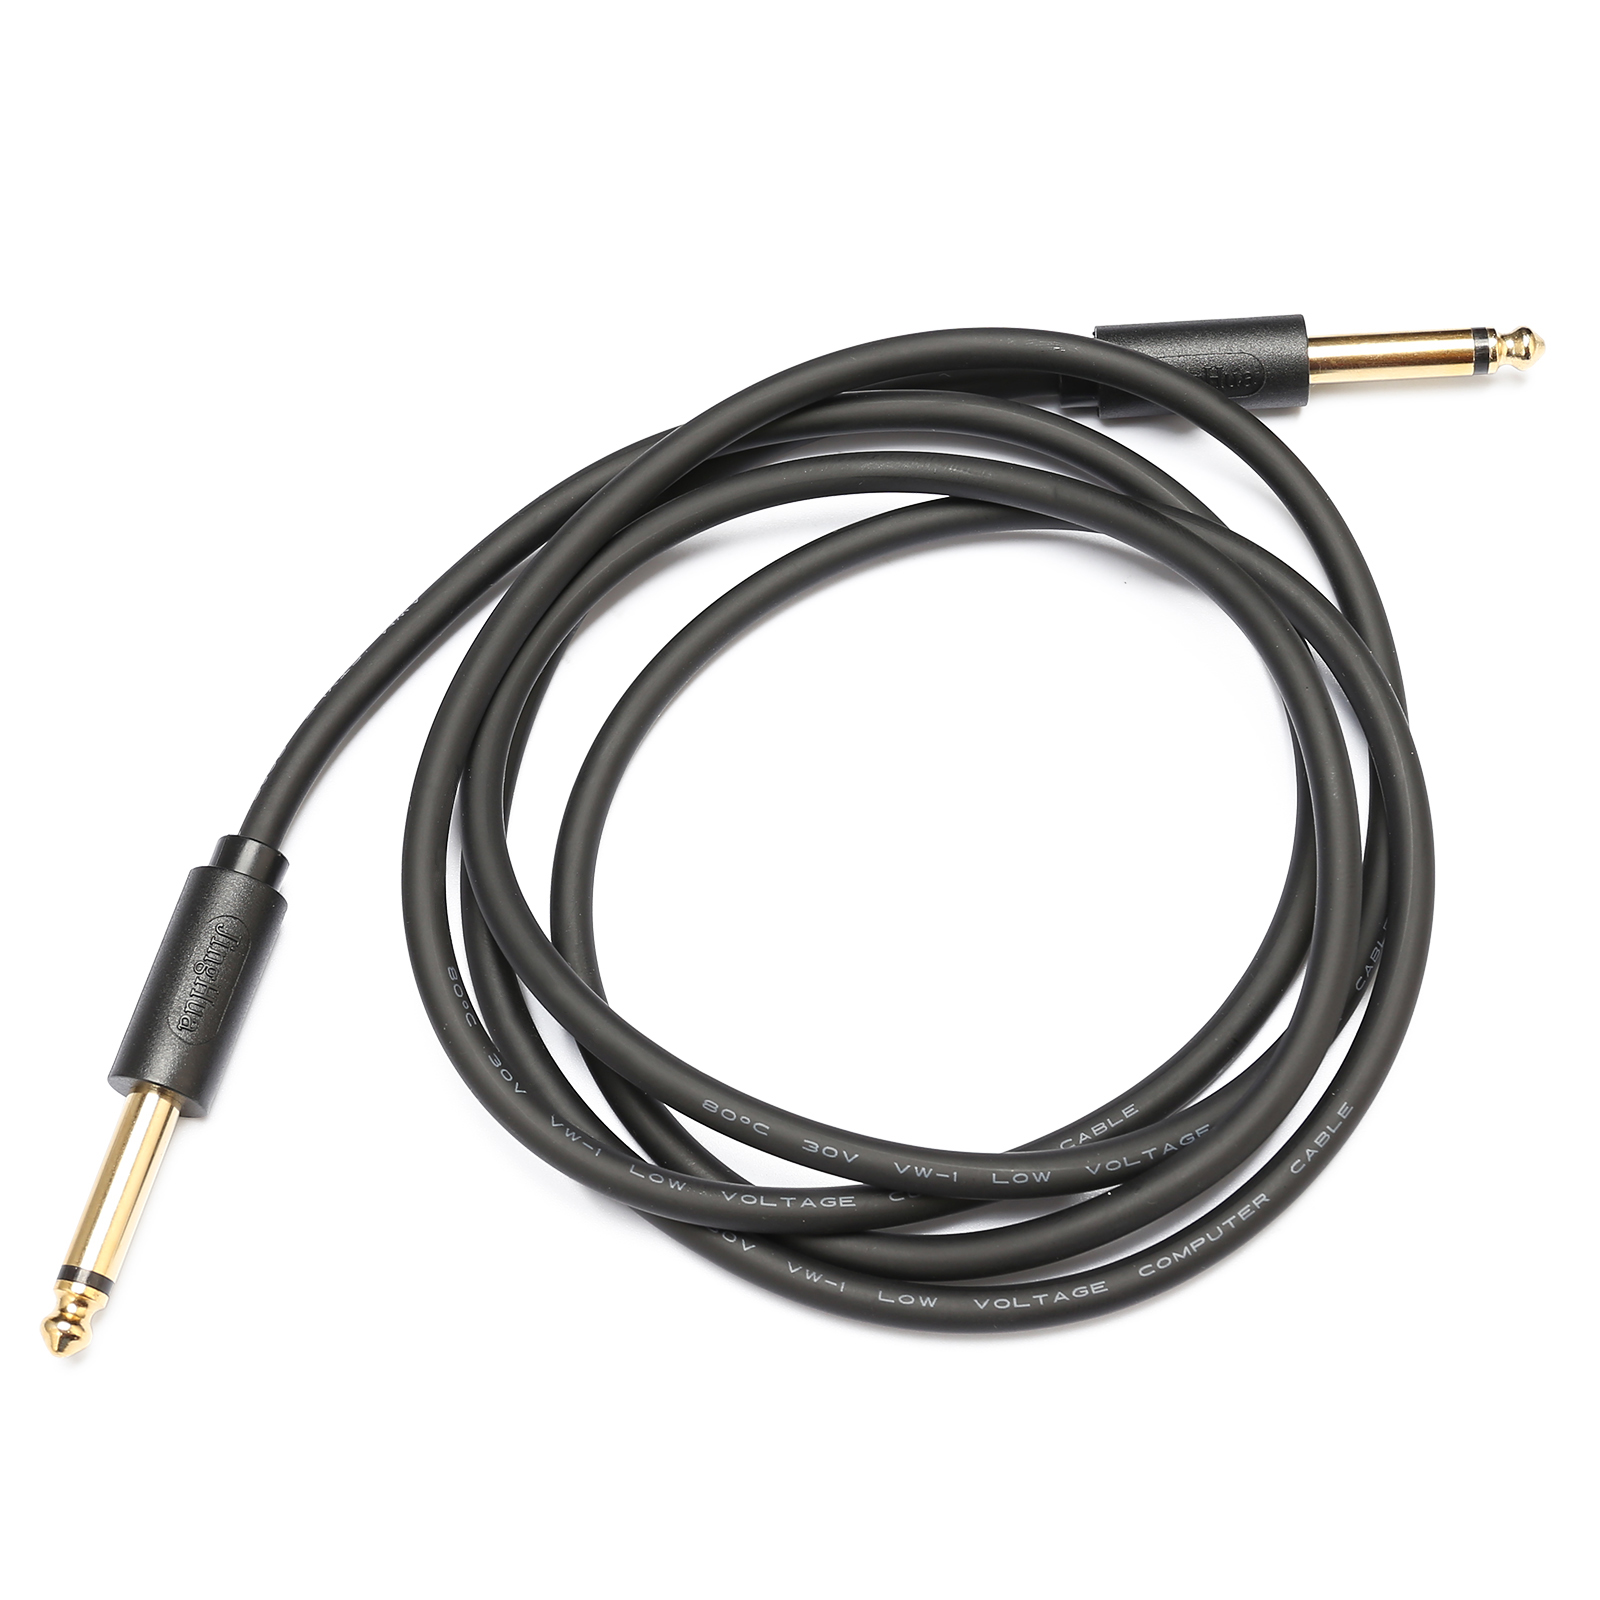 6.35mm audio tuning microphone cable